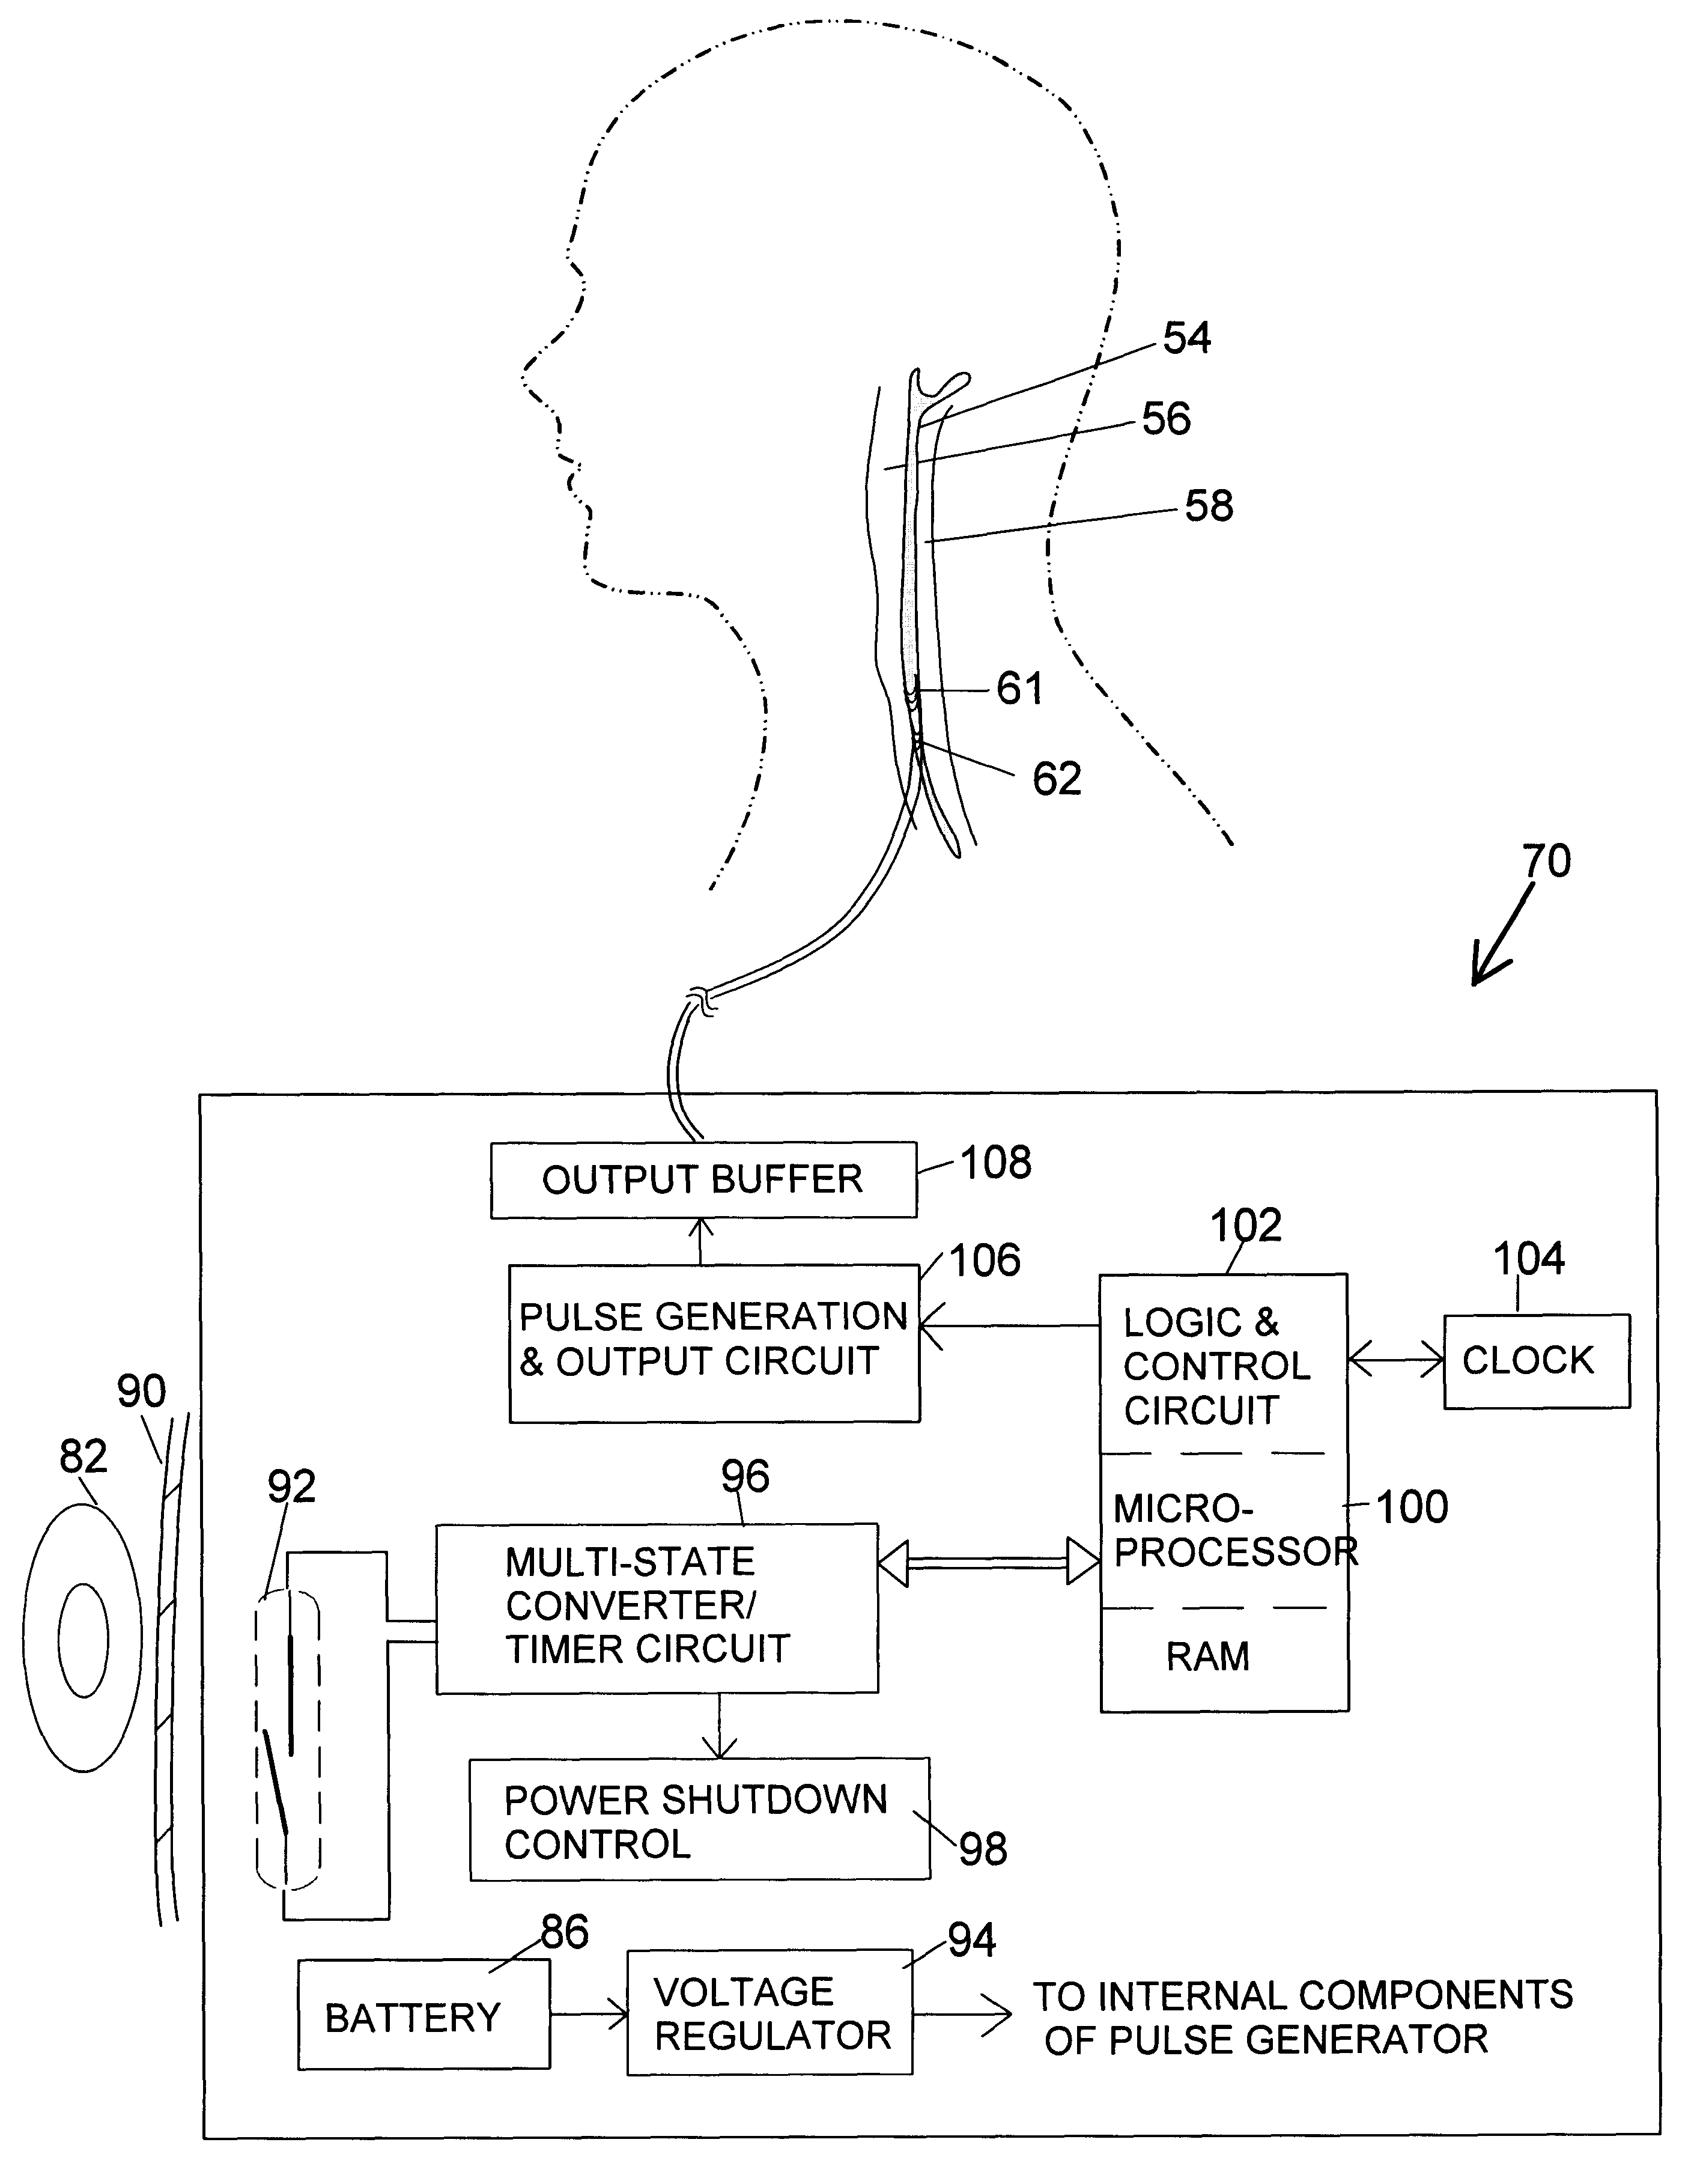 Apparatus and method for treatment of neurological and neuropsychiatric disorders using programmerless implantable pulse generator system